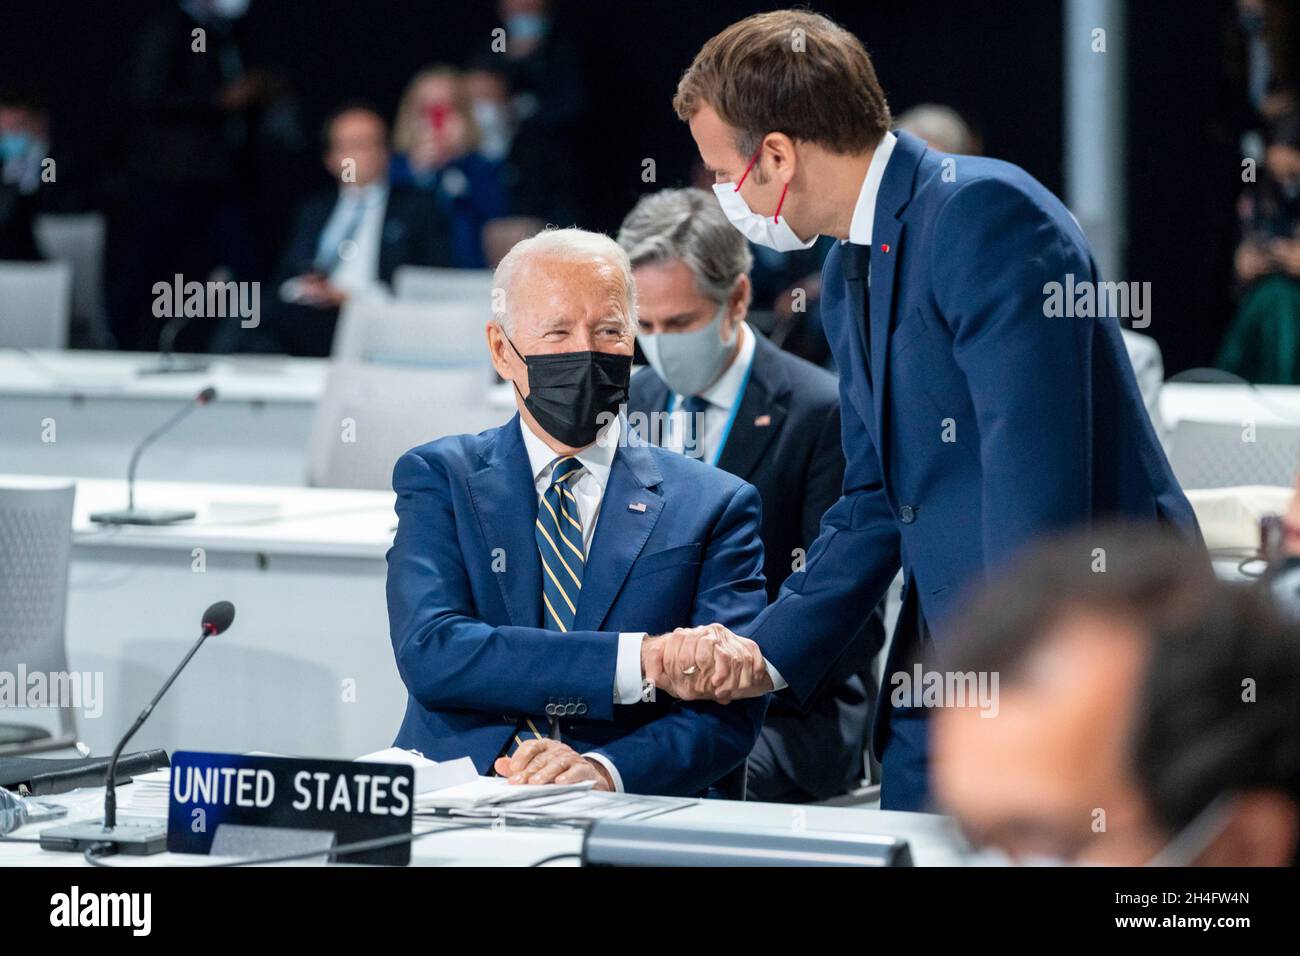 Glasgow, United Kingdom. 01st Nov, 2021. U.S President Joe Biden greets French President Emmanuel Macron, right, during the first day of the COP26 U.N. Climate Summit at the Glasgow Science Centre November 1, 2021 in Glasgow, Scotland.Credit: Adam Schultz/White House Photo/Alamy Live News Stock Photo